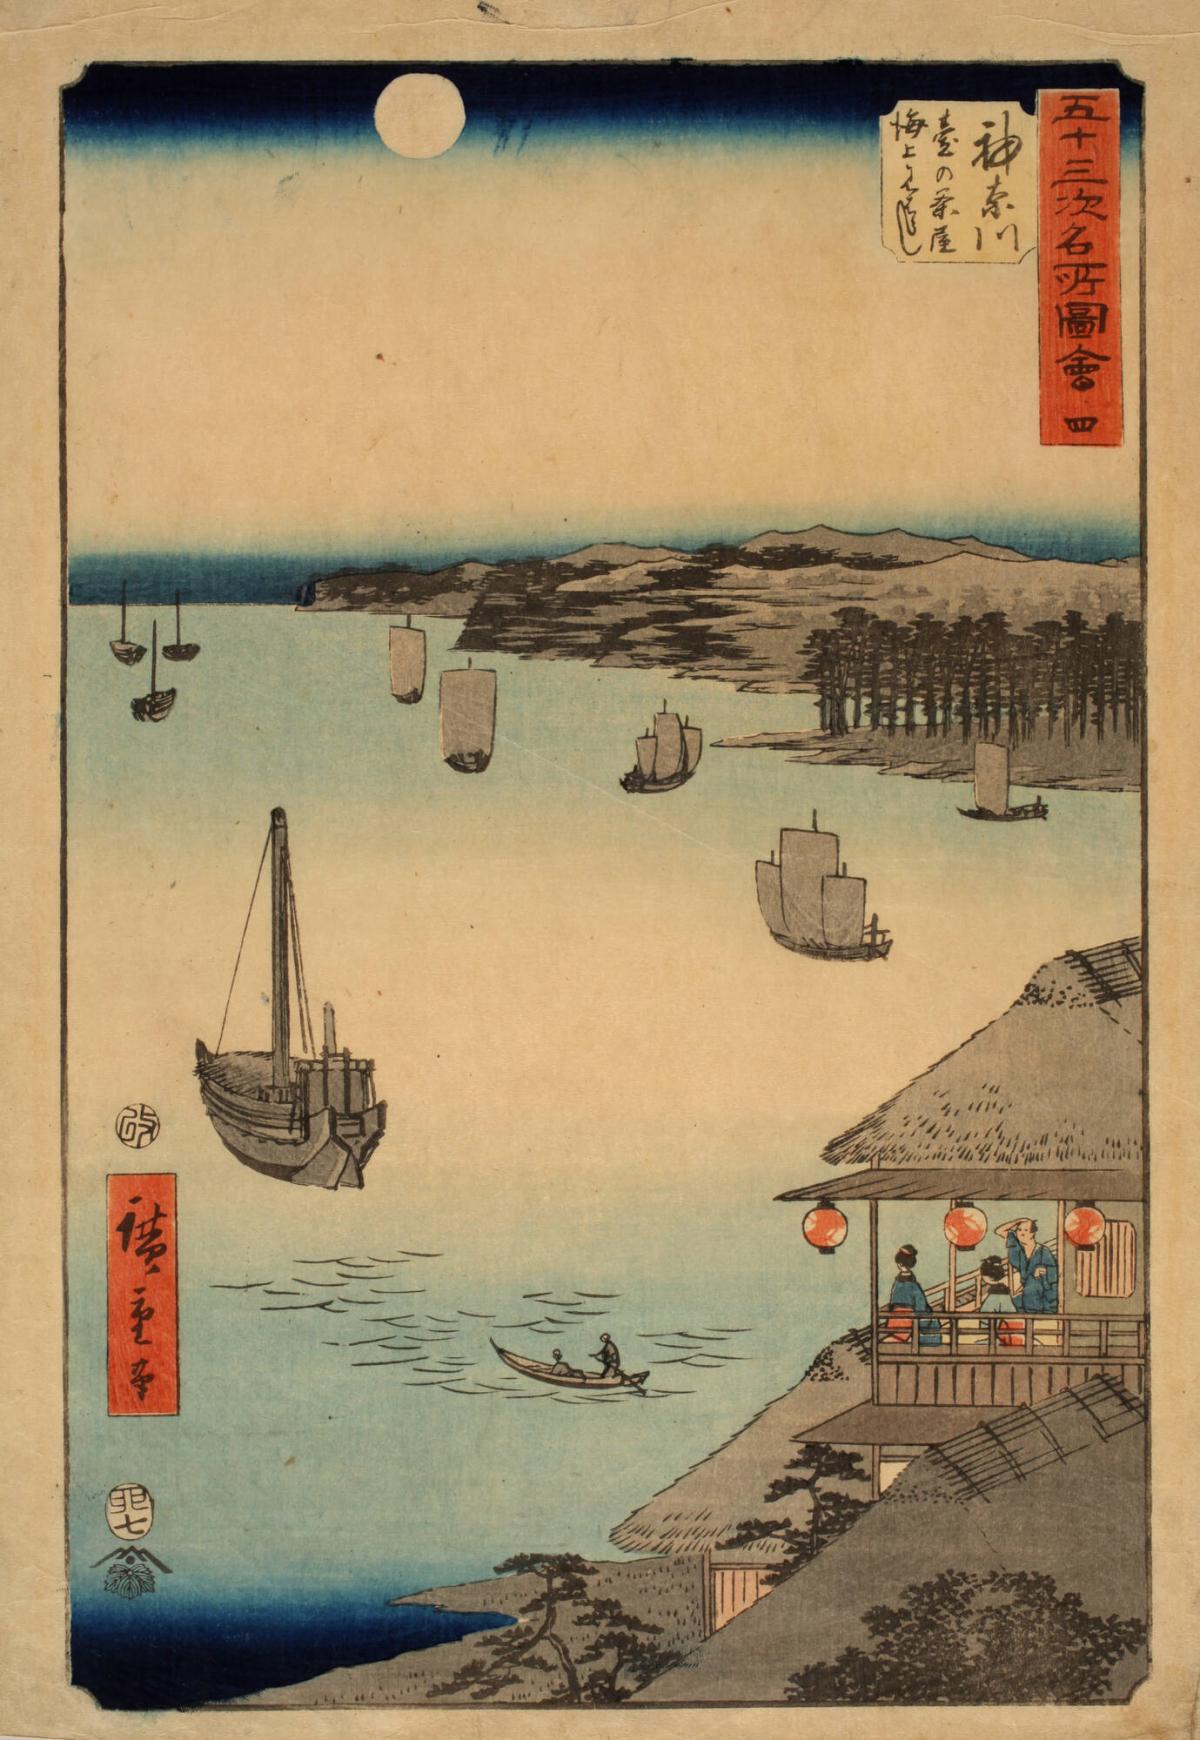 Kanagawa, View over the Sea from theTea Houses on the Embankment, from the series Famous Sights of the Fifty-three Stations